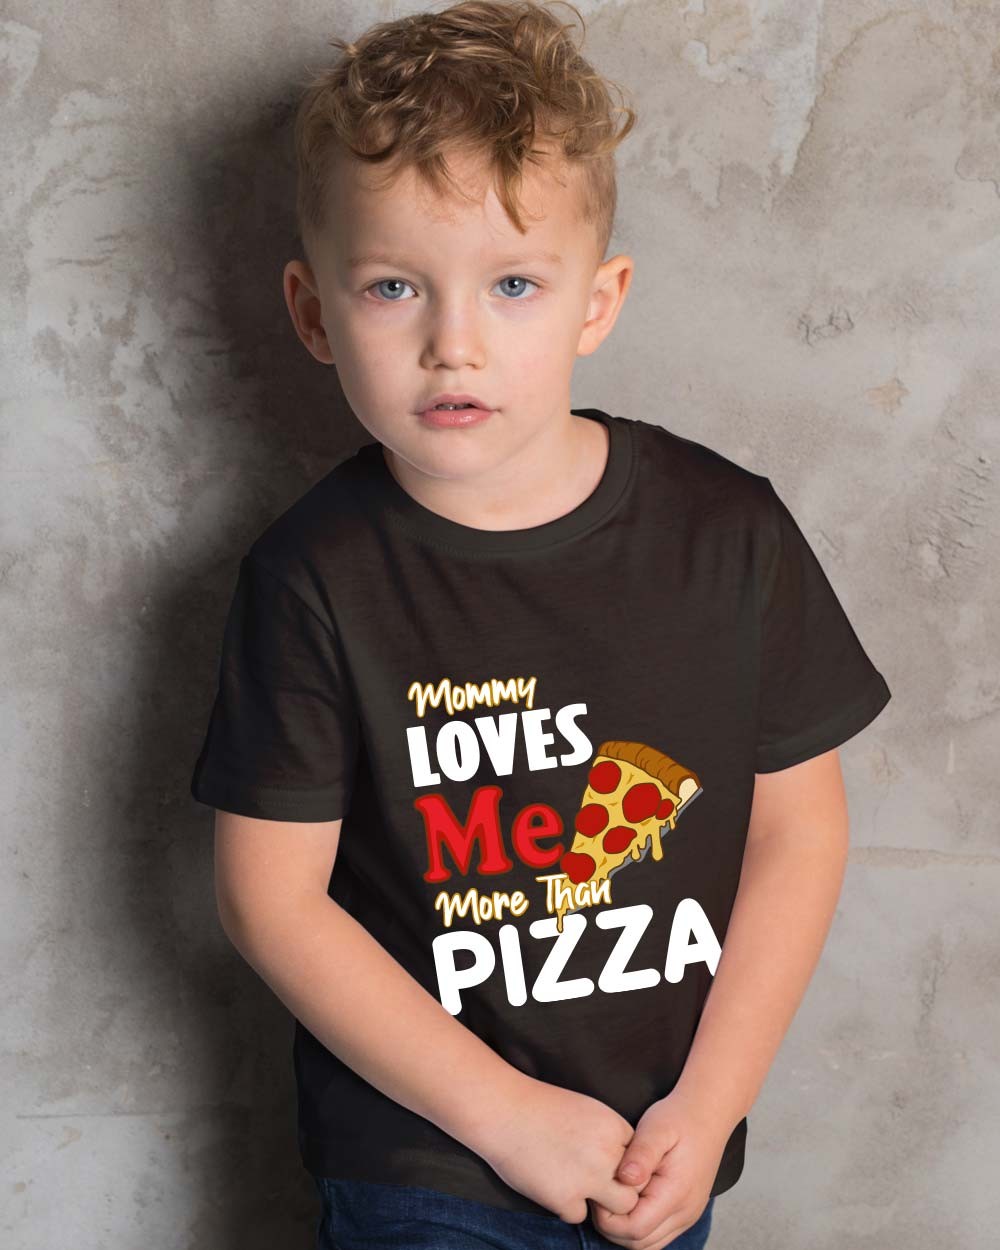 My Daddy Loves Me More Than Pizza Toddler/Kids Short Sleeve T-Shirt 